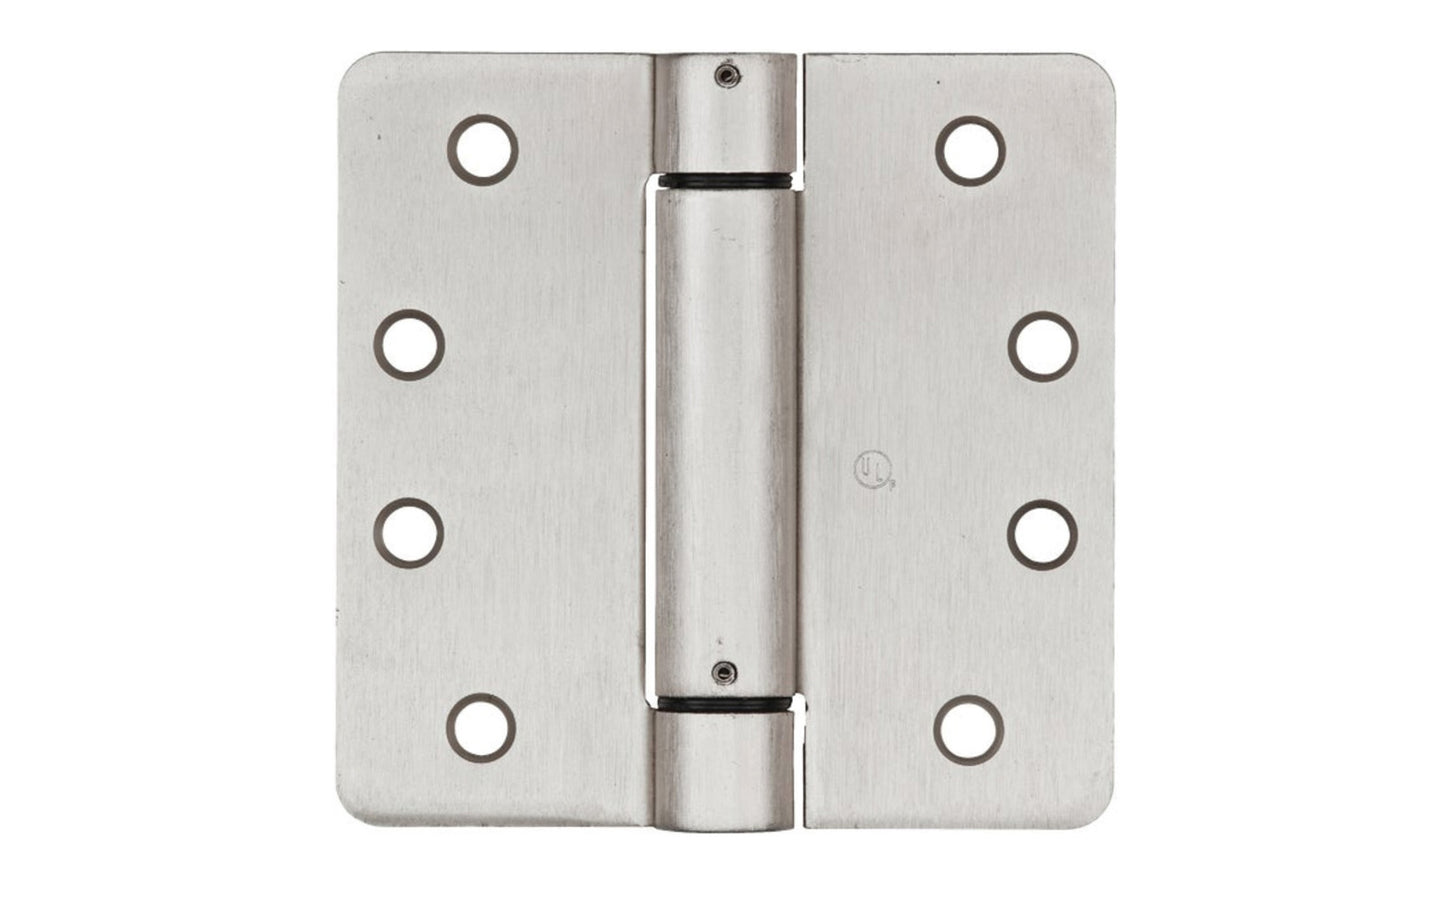 This 4" Satin Nickel Finish Spring Hinge is designed for hanging self-closing doors in basements, stairways, garages, & entrances, etc. Can be used in residential, commercial, & apartment buildings. Hinge is UL approved for fire doors. Closing speed is adjustable. Fits standard hinge cutout. 1/4" radius, round corner automatic door-closing spring hinge. Sold as a single hinge in pack.  National Hardware Model No. N350-868.